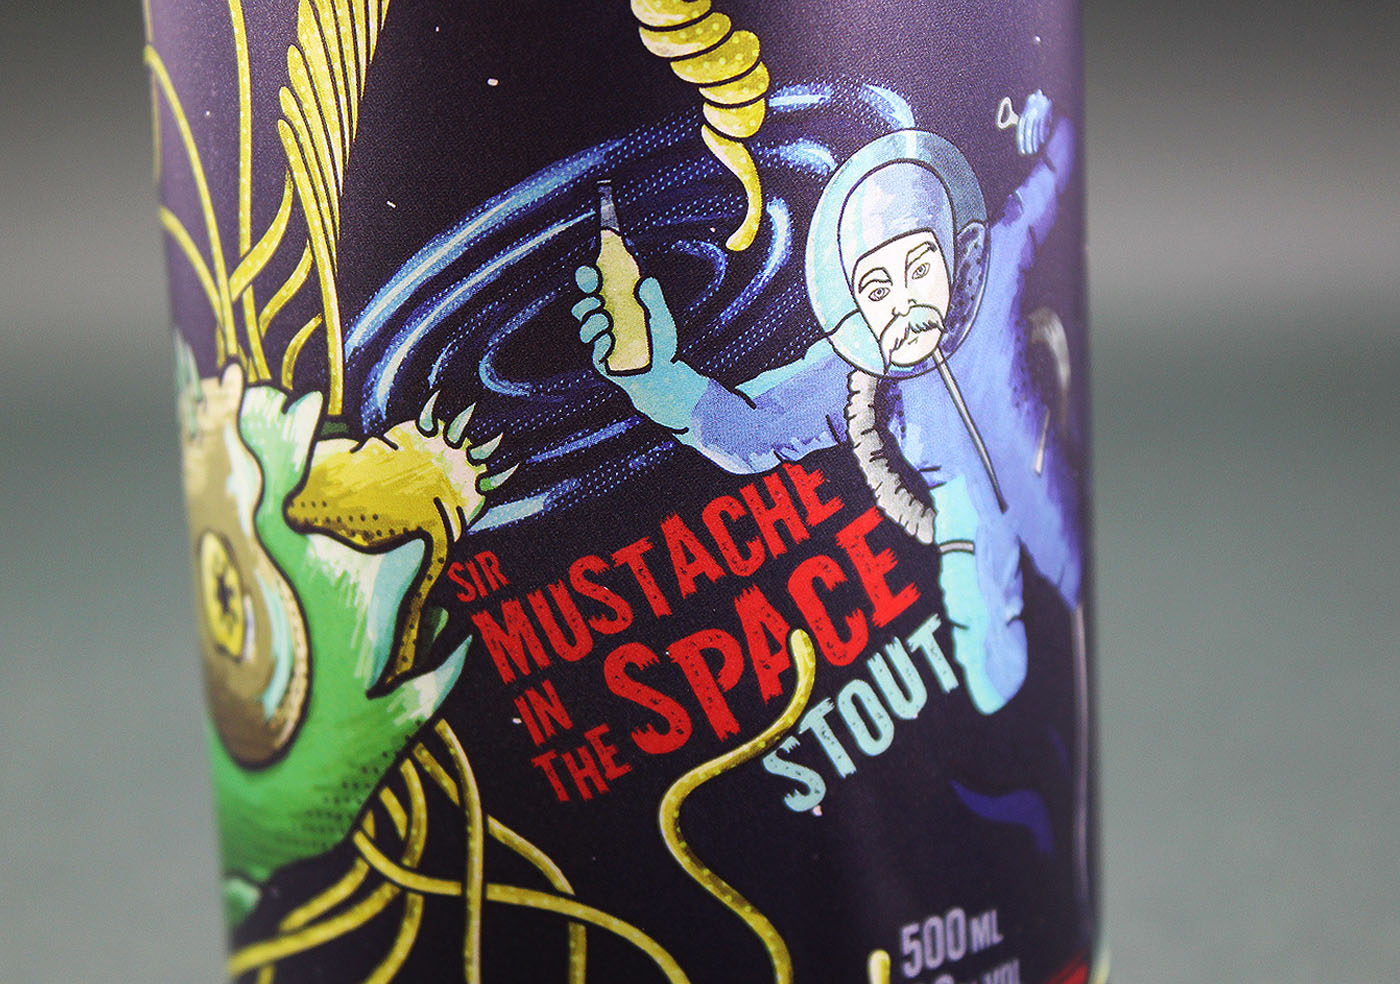 Brazilian Beer Brand and Label with Big Personality